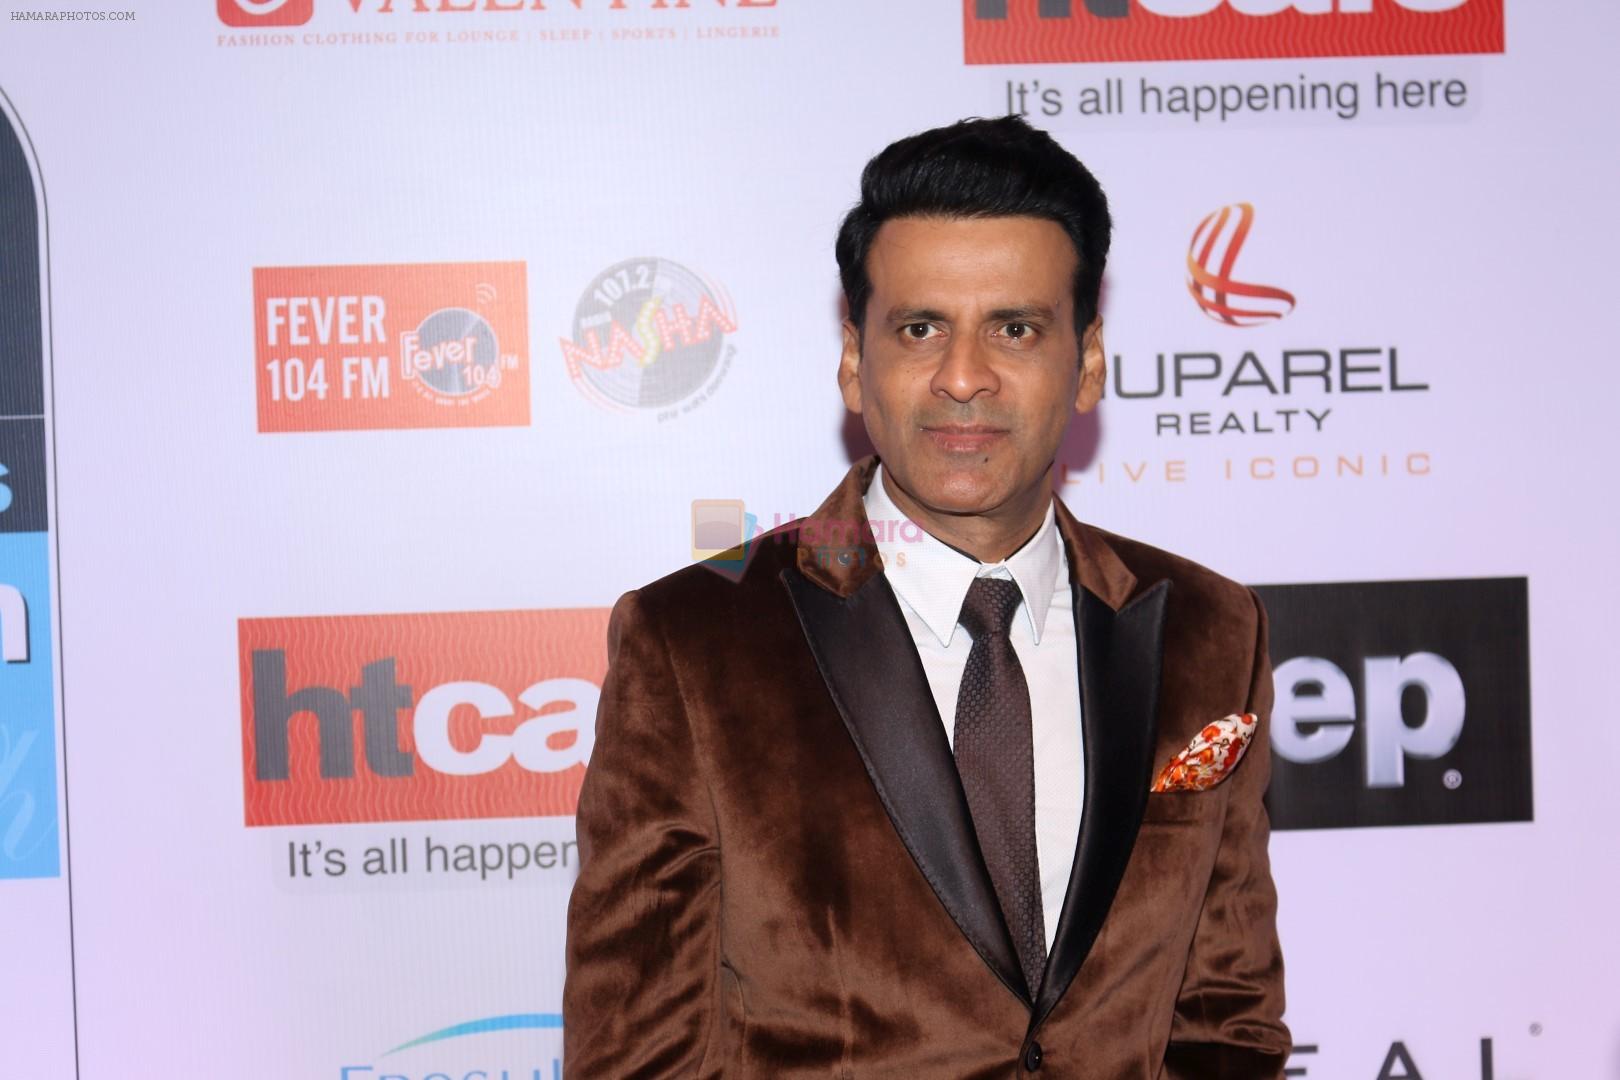 Manoj Bajpai at the Red Carpet Of Most Stylish Awards 2017 on 24th March 2017